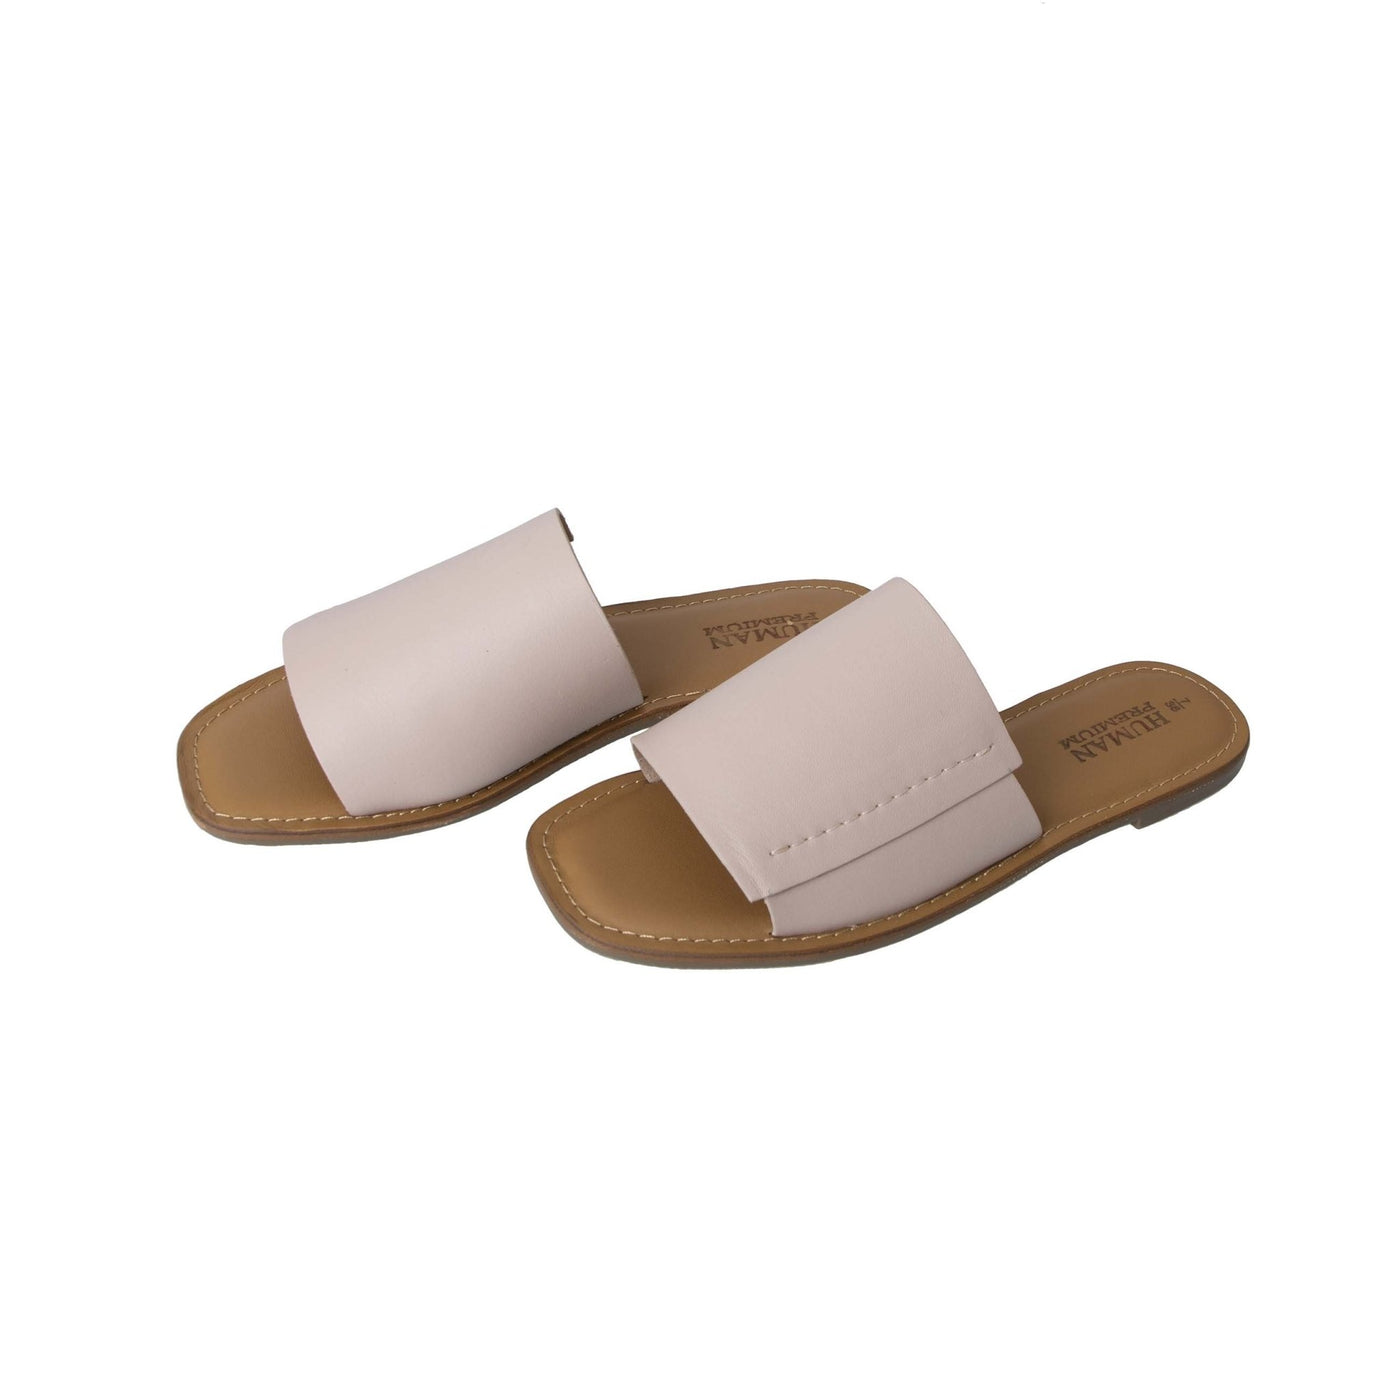 Human Shoes Oats Leather Slide in Blush - Hey Sara